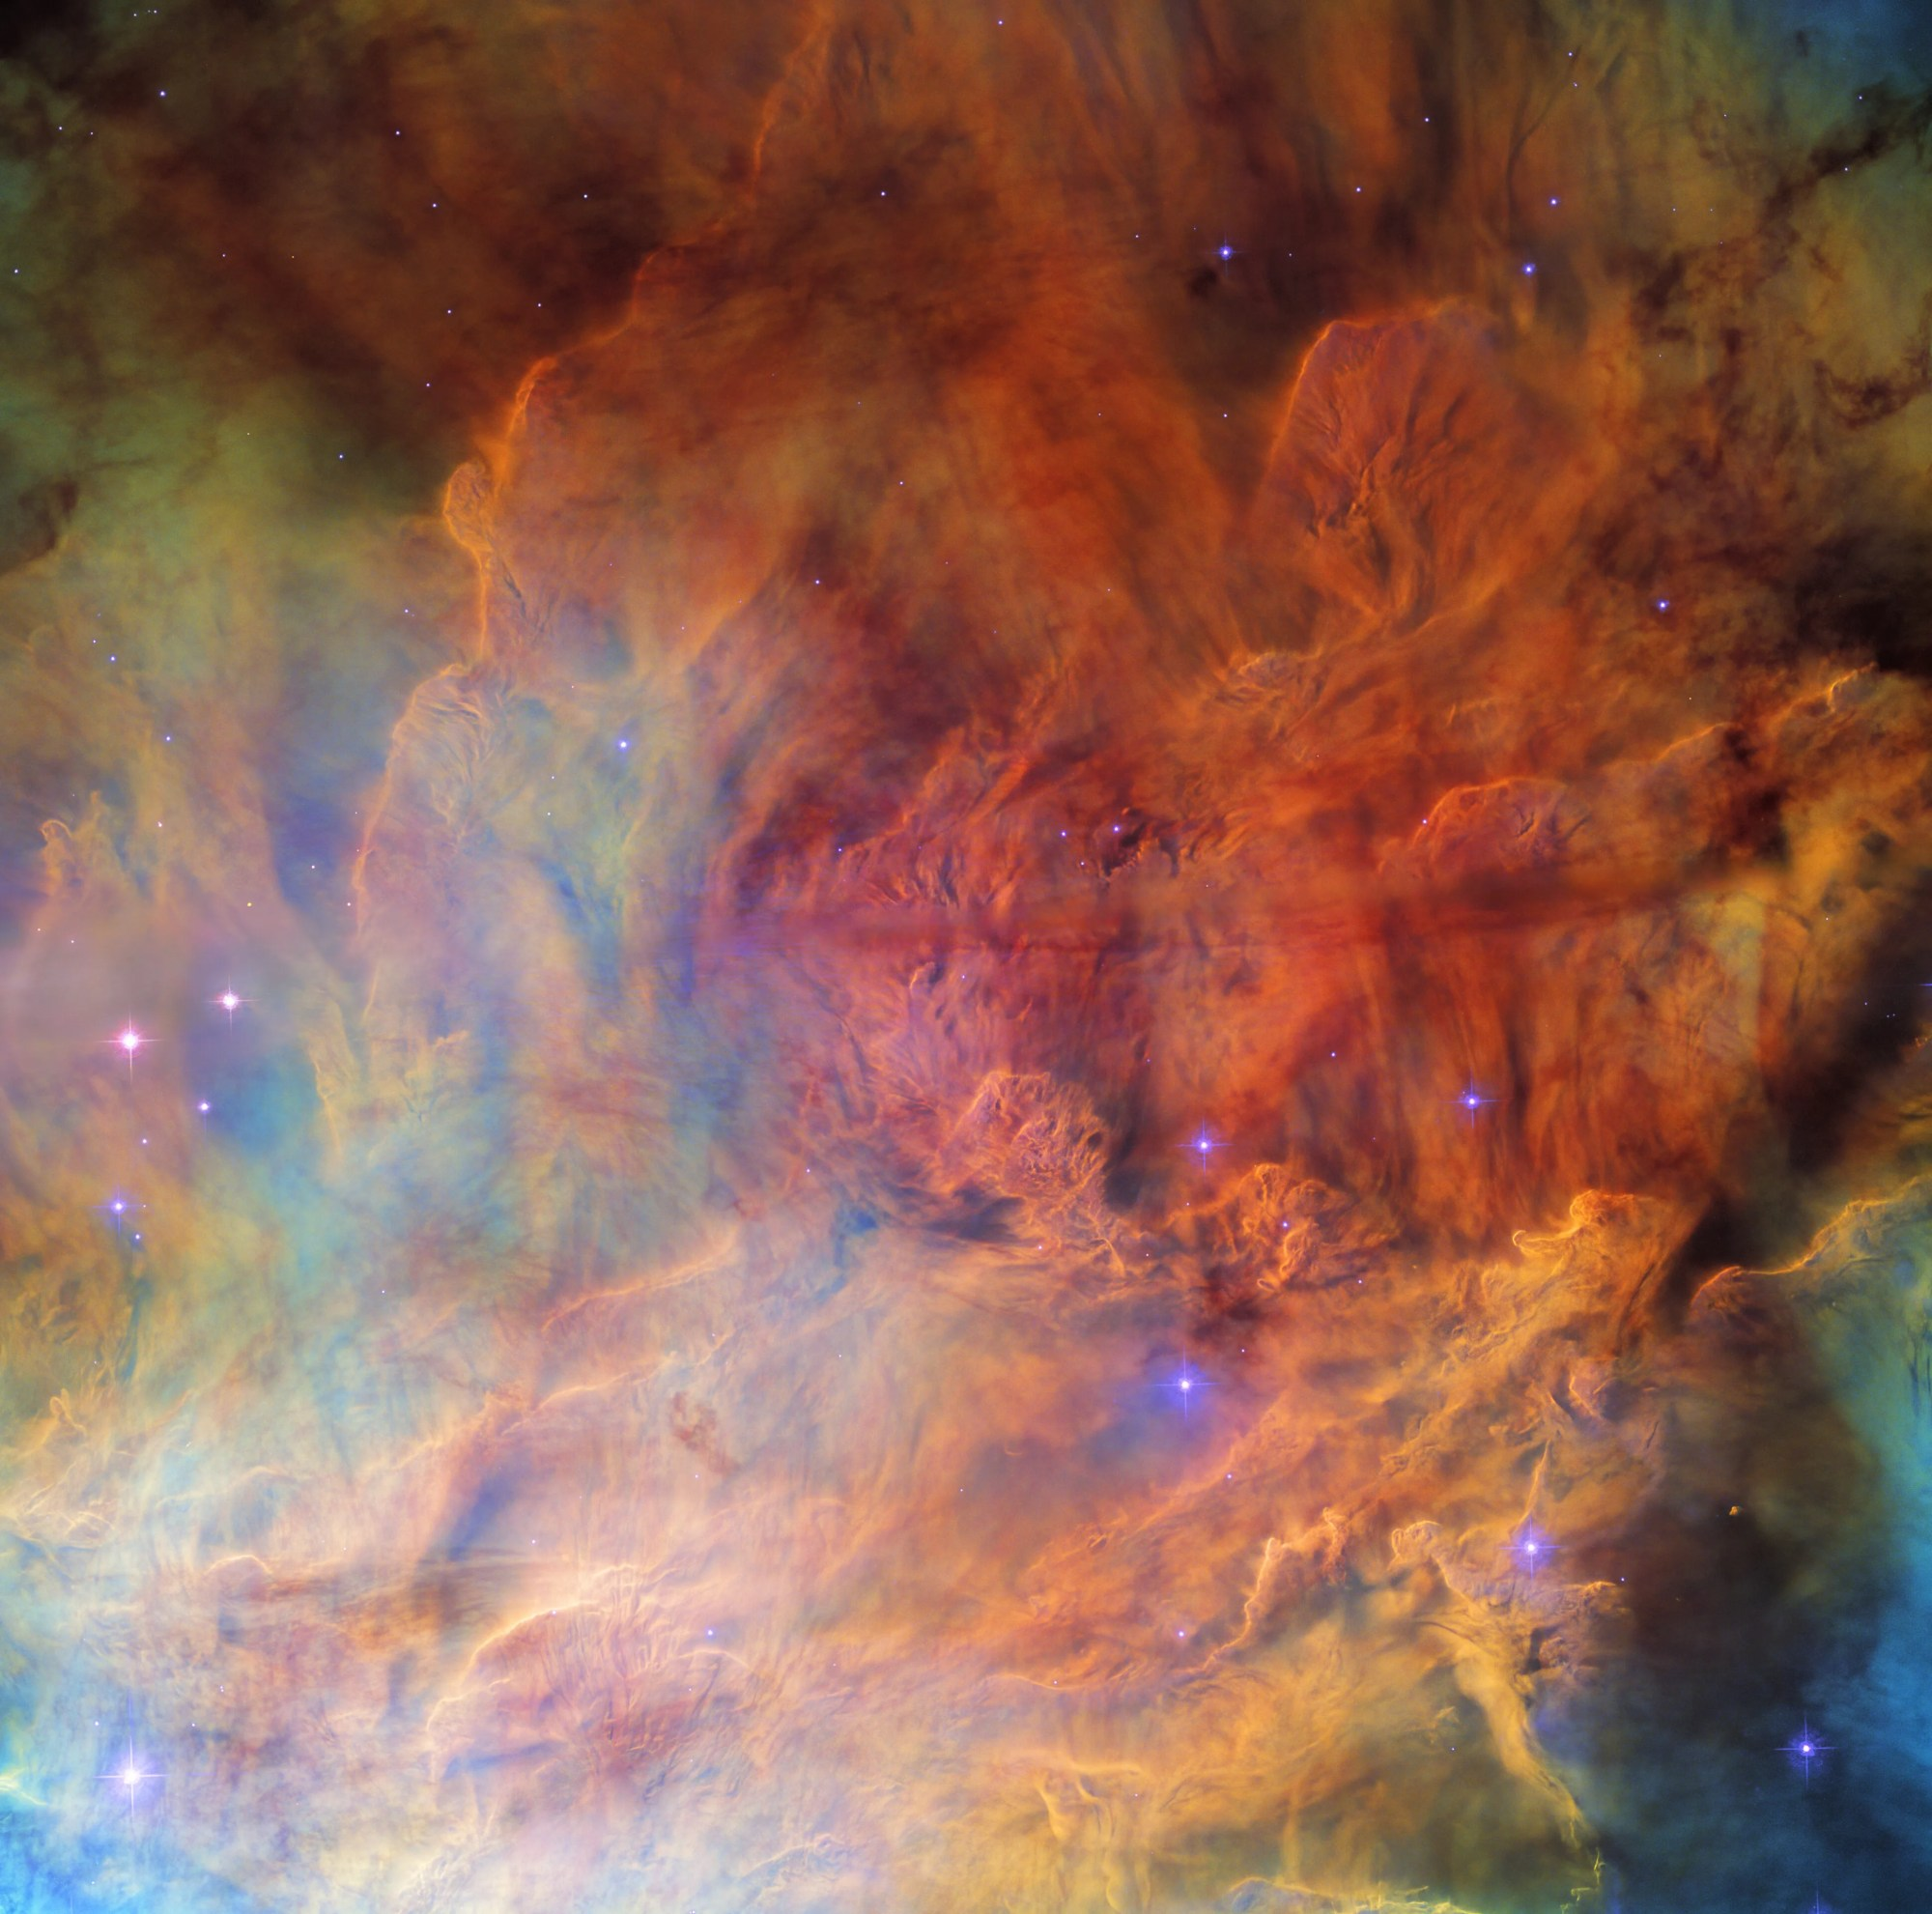 Clouds of gas cover the entire view, in a variety of bold colors. in the center the gas is brighter and very textured, resembling dense smoke. around the edges it is sparser and fainter. several small, bright blue stars are scattered over the nebula.